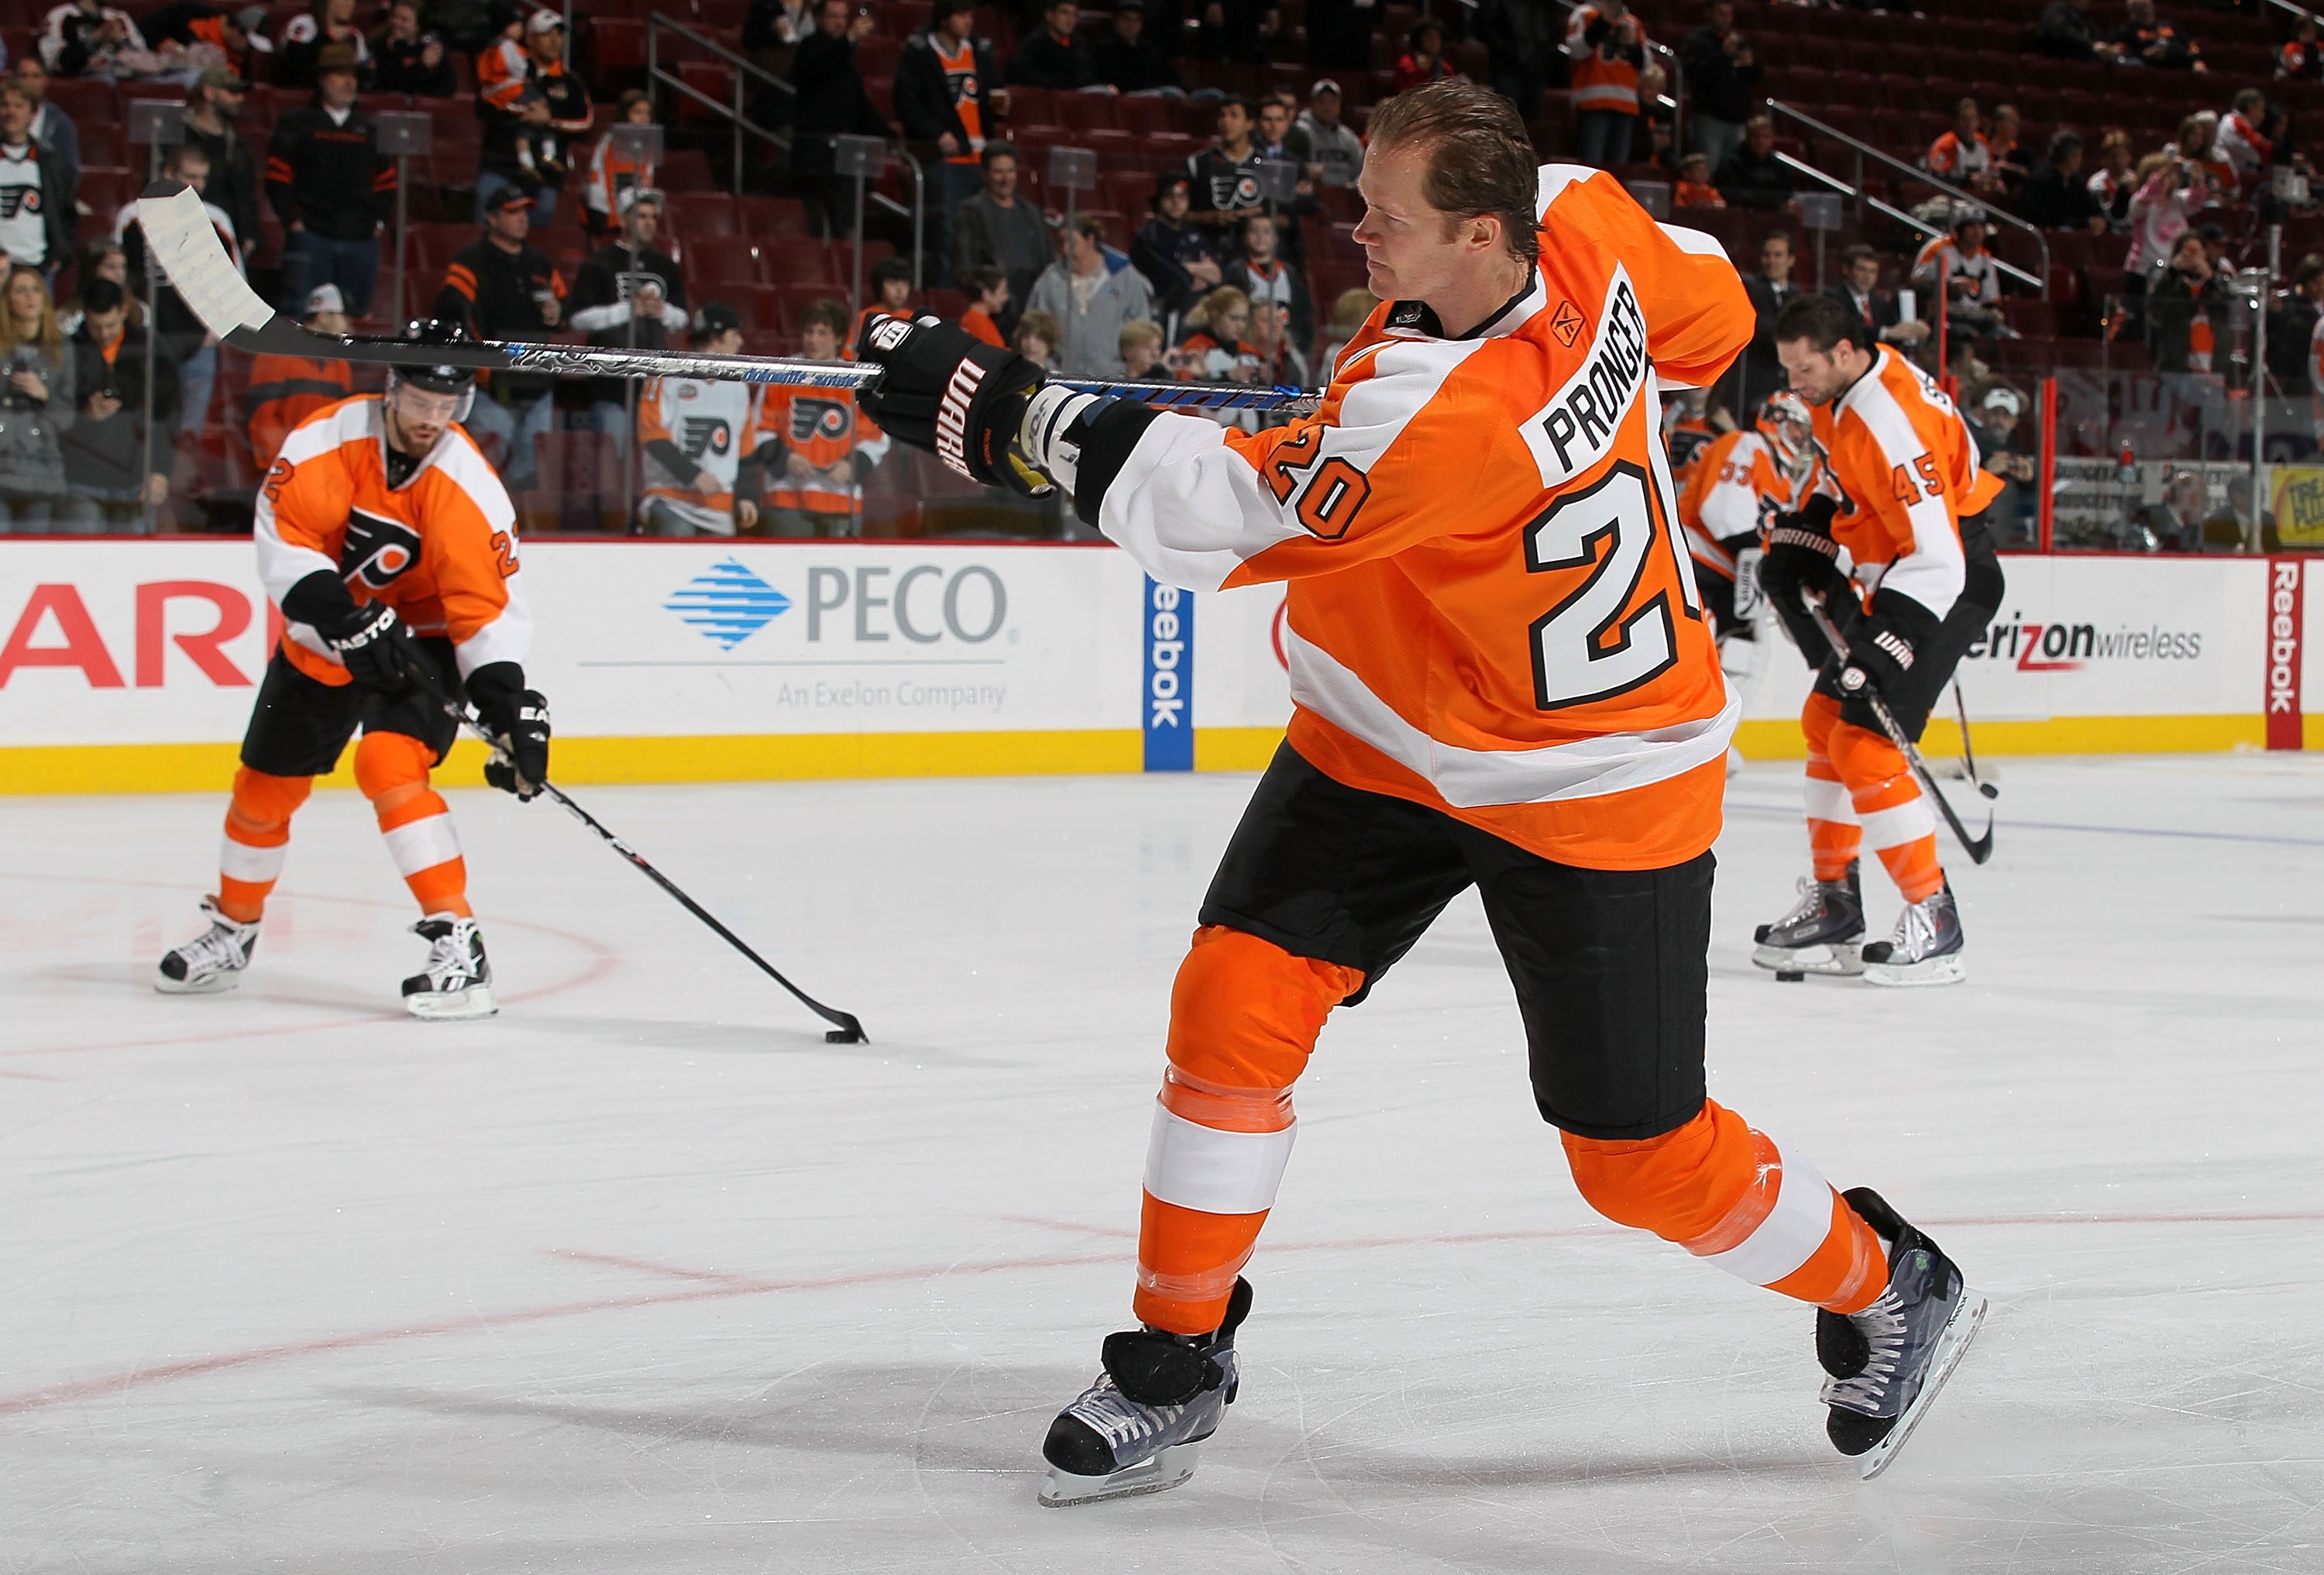 PHILADELPHIA, PA - JANUARY 20:  Chris Pronger #20 of the Philadelphia Flyers warms up before playing agauinst the Ottawa Senators on January 20, 2011 at Wells Fargo Center in Philadelphia, Pennsylvania.  (Photo by Jim McIsaac/Getty Images)